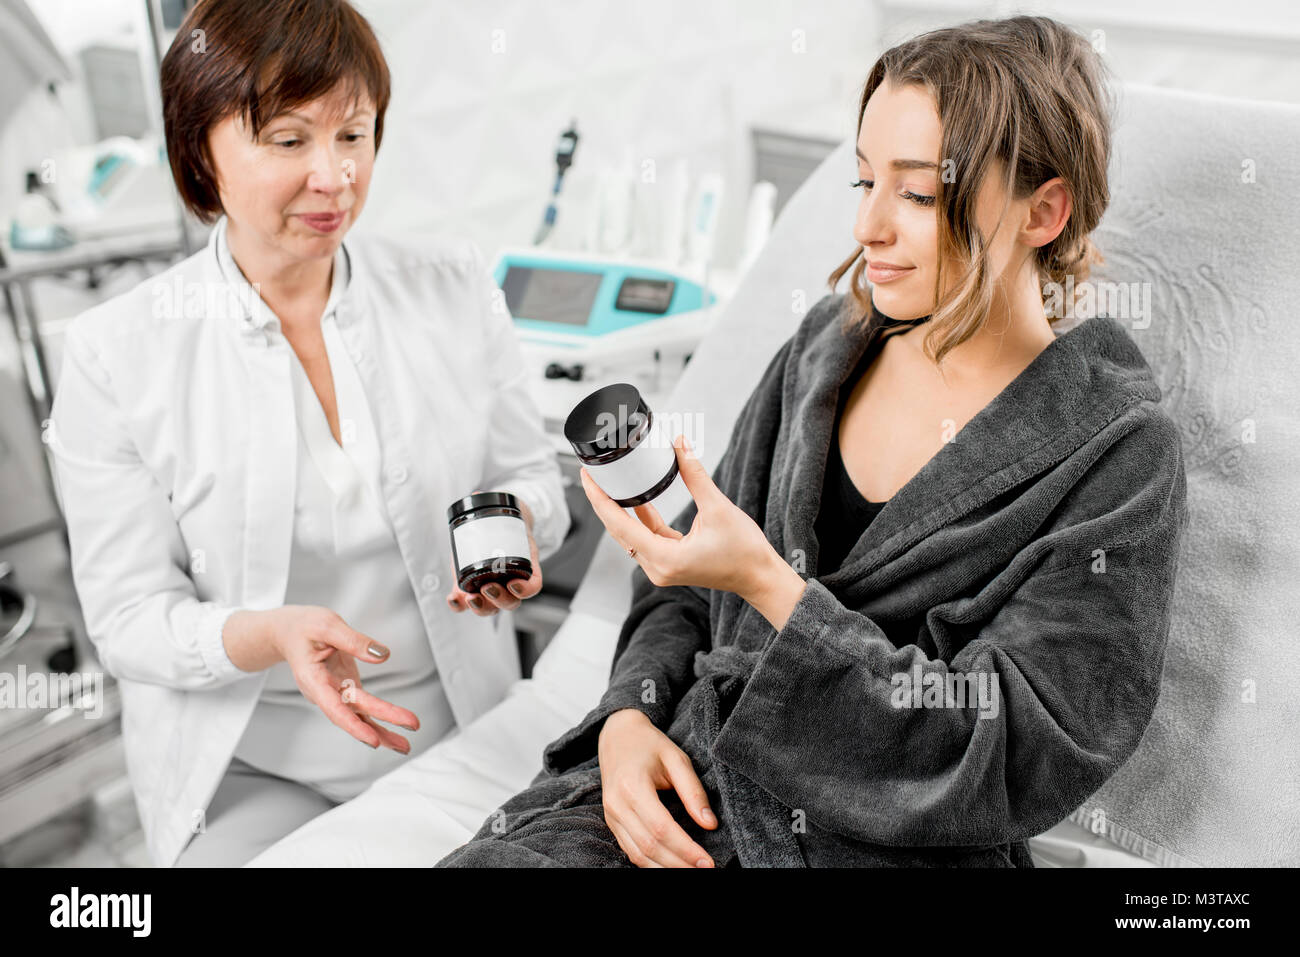 Doctor offering bio additives to a patient Stock Photo